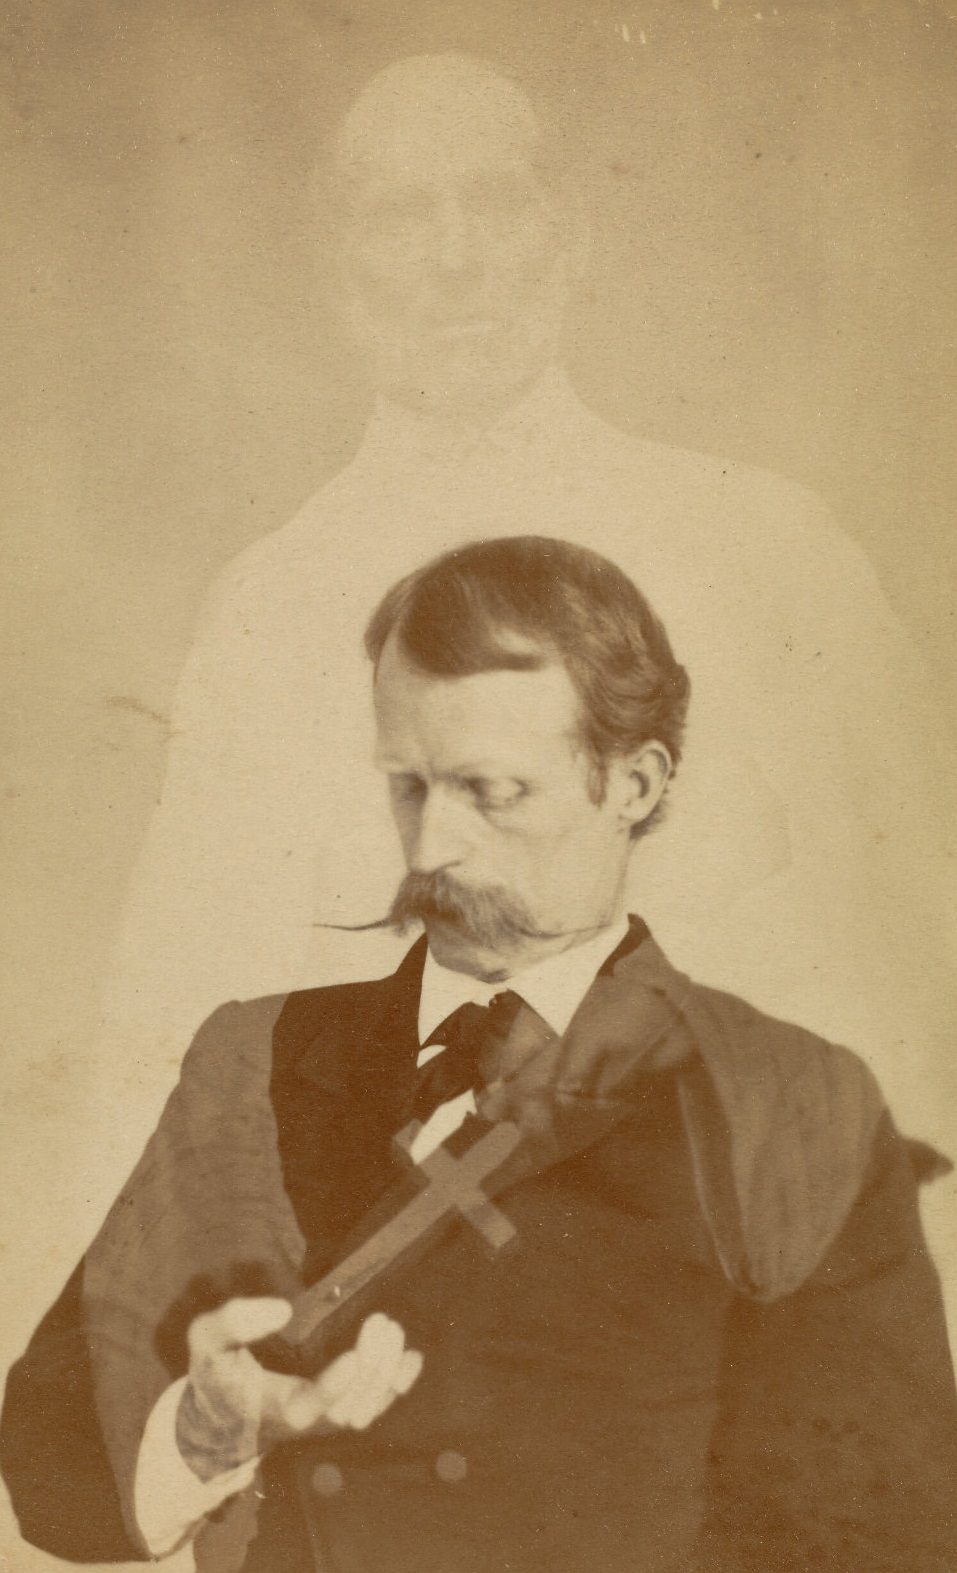 Portrait of Harry Gordon looking down into his hand, while the faint figure of a bearded man appears behind him, with hands that seem to be placing a crucifix into the open hand of the sitter.